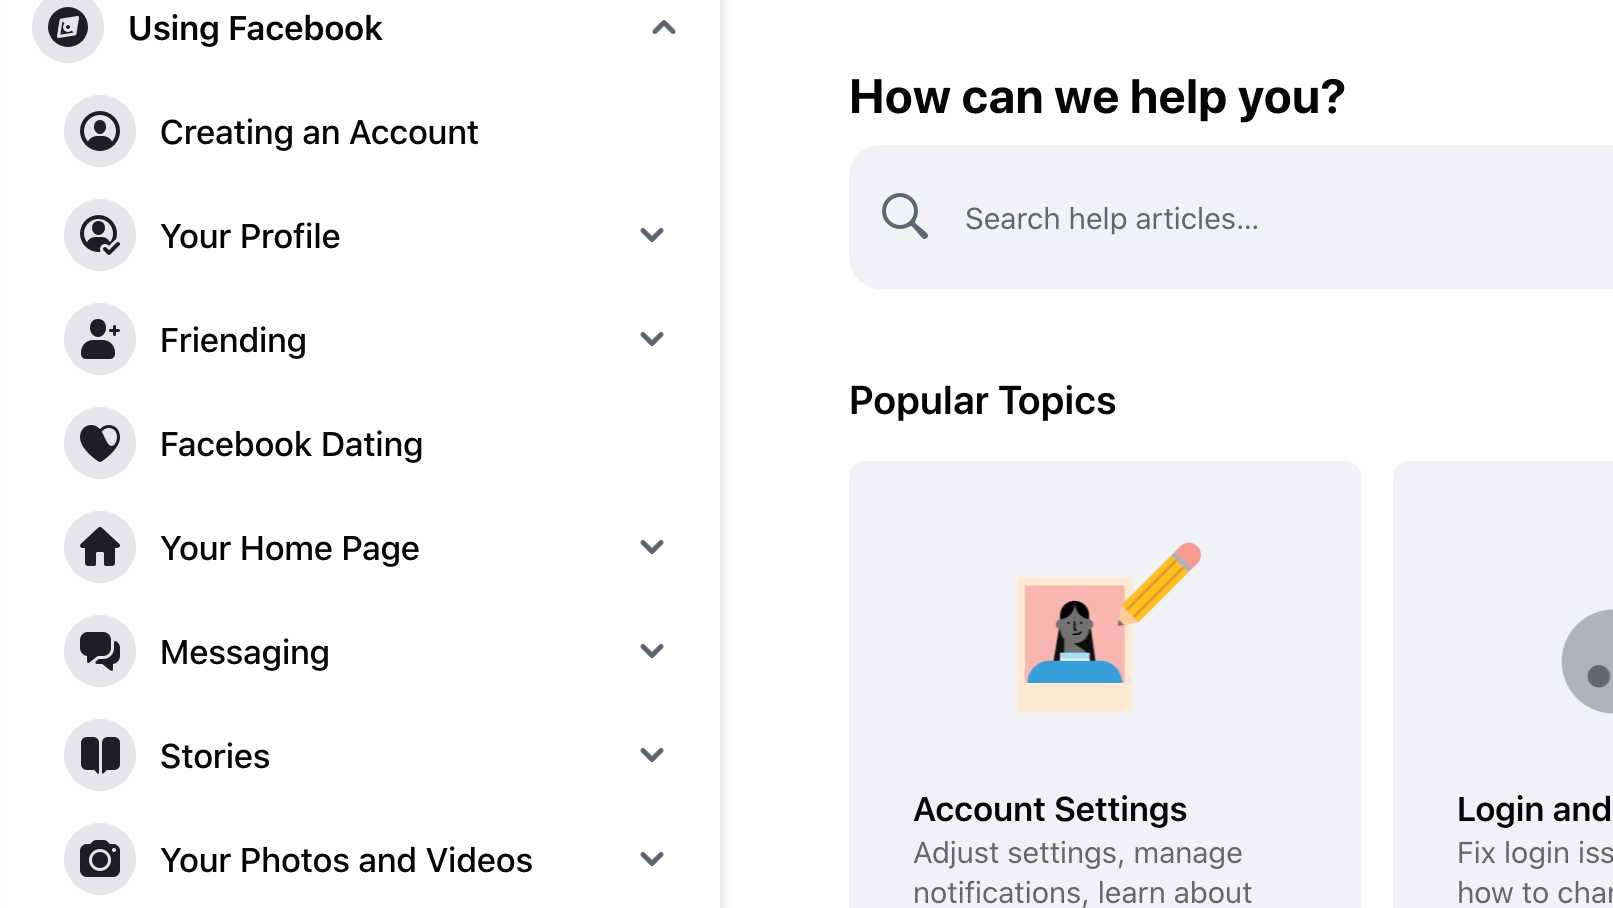 Using Facebook Help Center section